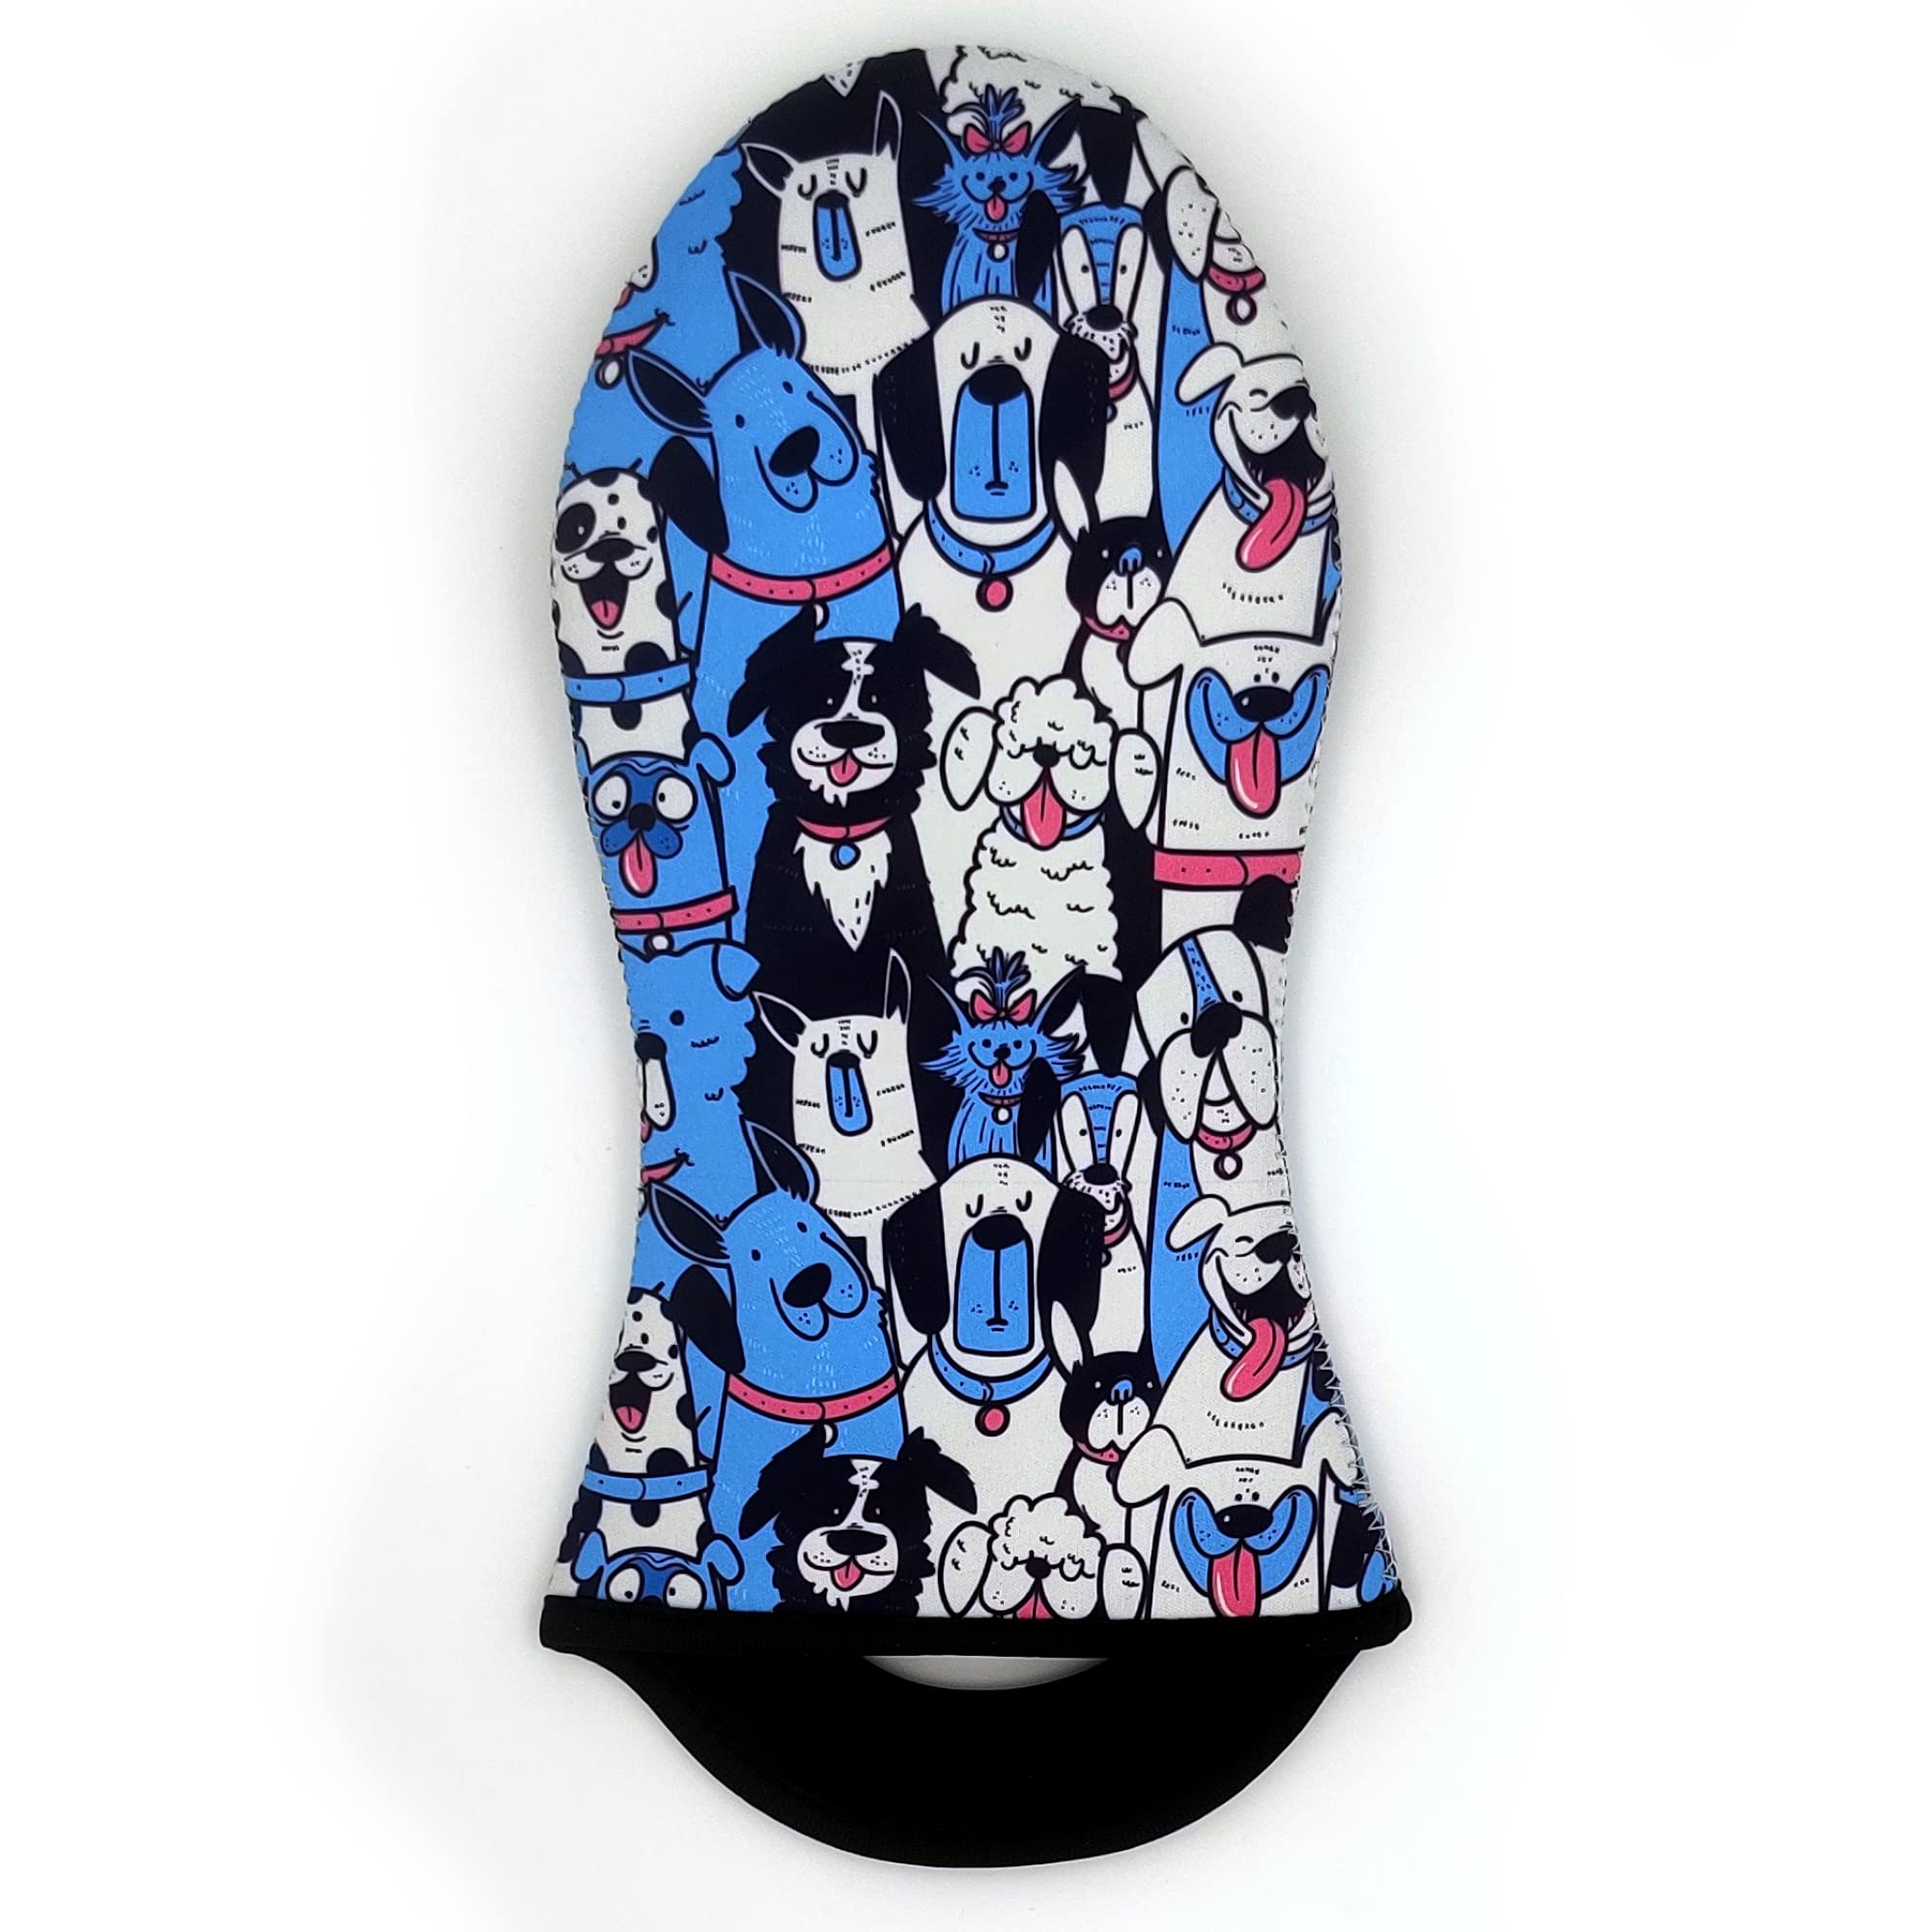 Dog Print Oven Mitts 2 Pack, Neoprene Fabric Heat Resistant Rubber Grip, Kitchen Oven Glove, Washable Pot Holder